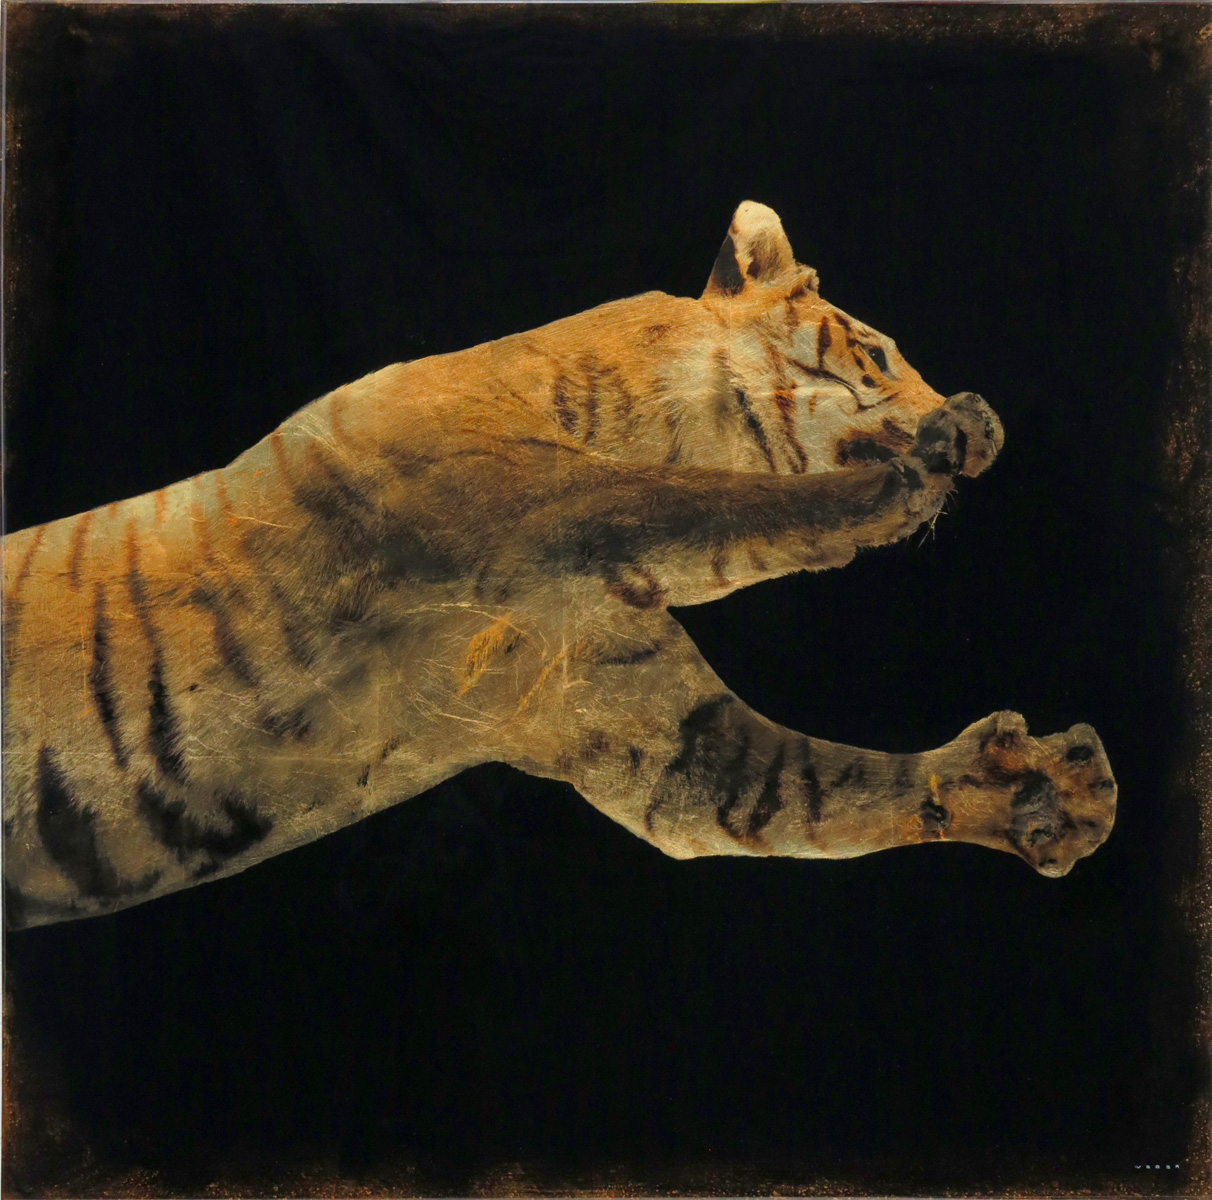 LEAPING TIGER, 36 X 36, $6,500 USD